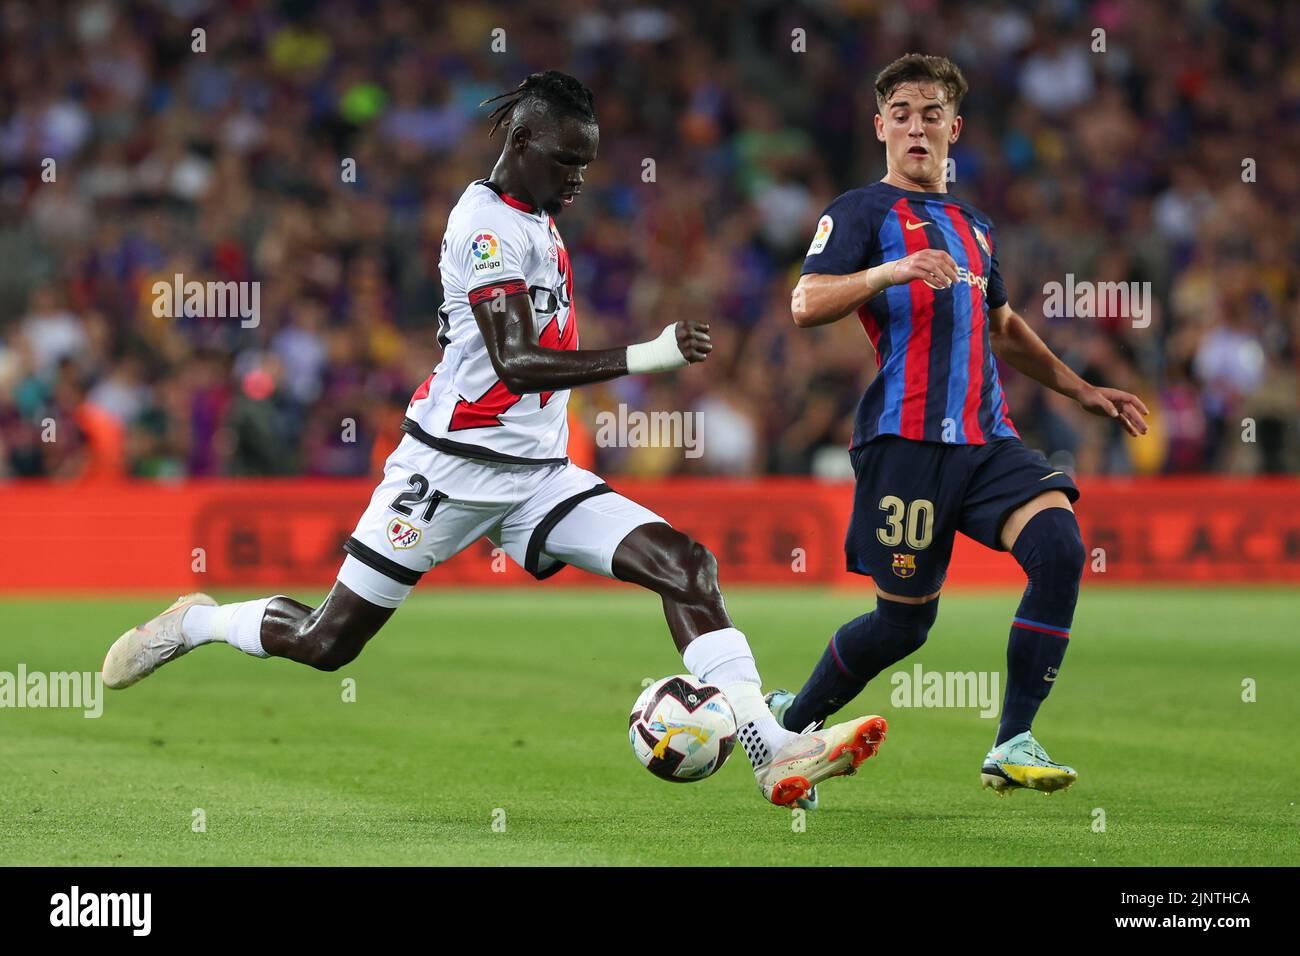 Pathe Ciss of Rayo Vallecano in action with Gavi of FC Barcelona during the Liga match between FC Barcelona and Rayo Vallecano at Spotify Camp Nou in Barcelona, Spain. Stock Photo